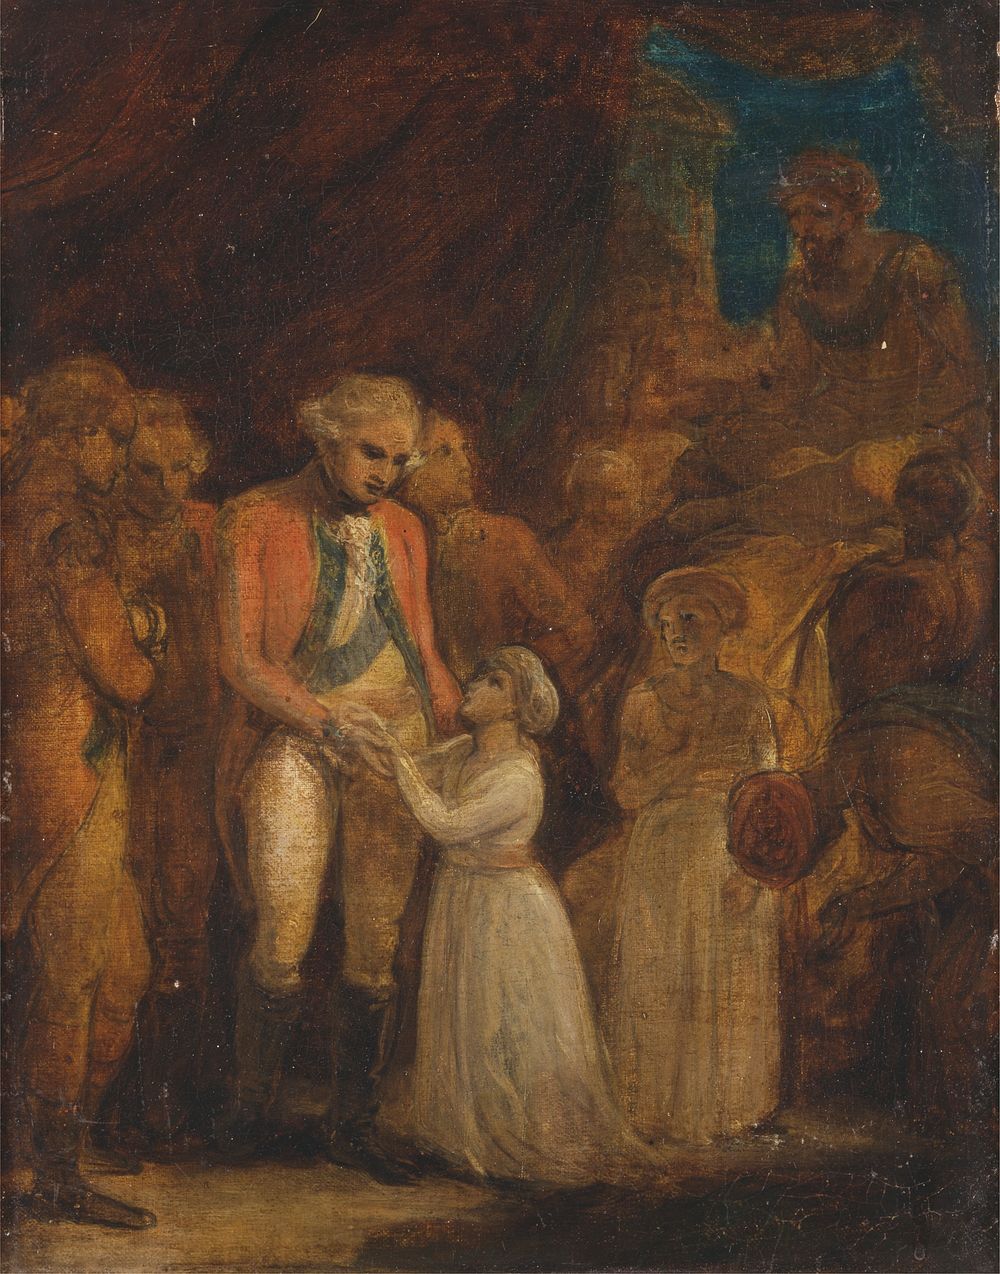 The Two Sons of Tipu Sahib, Sultan of Mysore, Being Handed over as Hostages to General Cornwallis by Robert Smirke